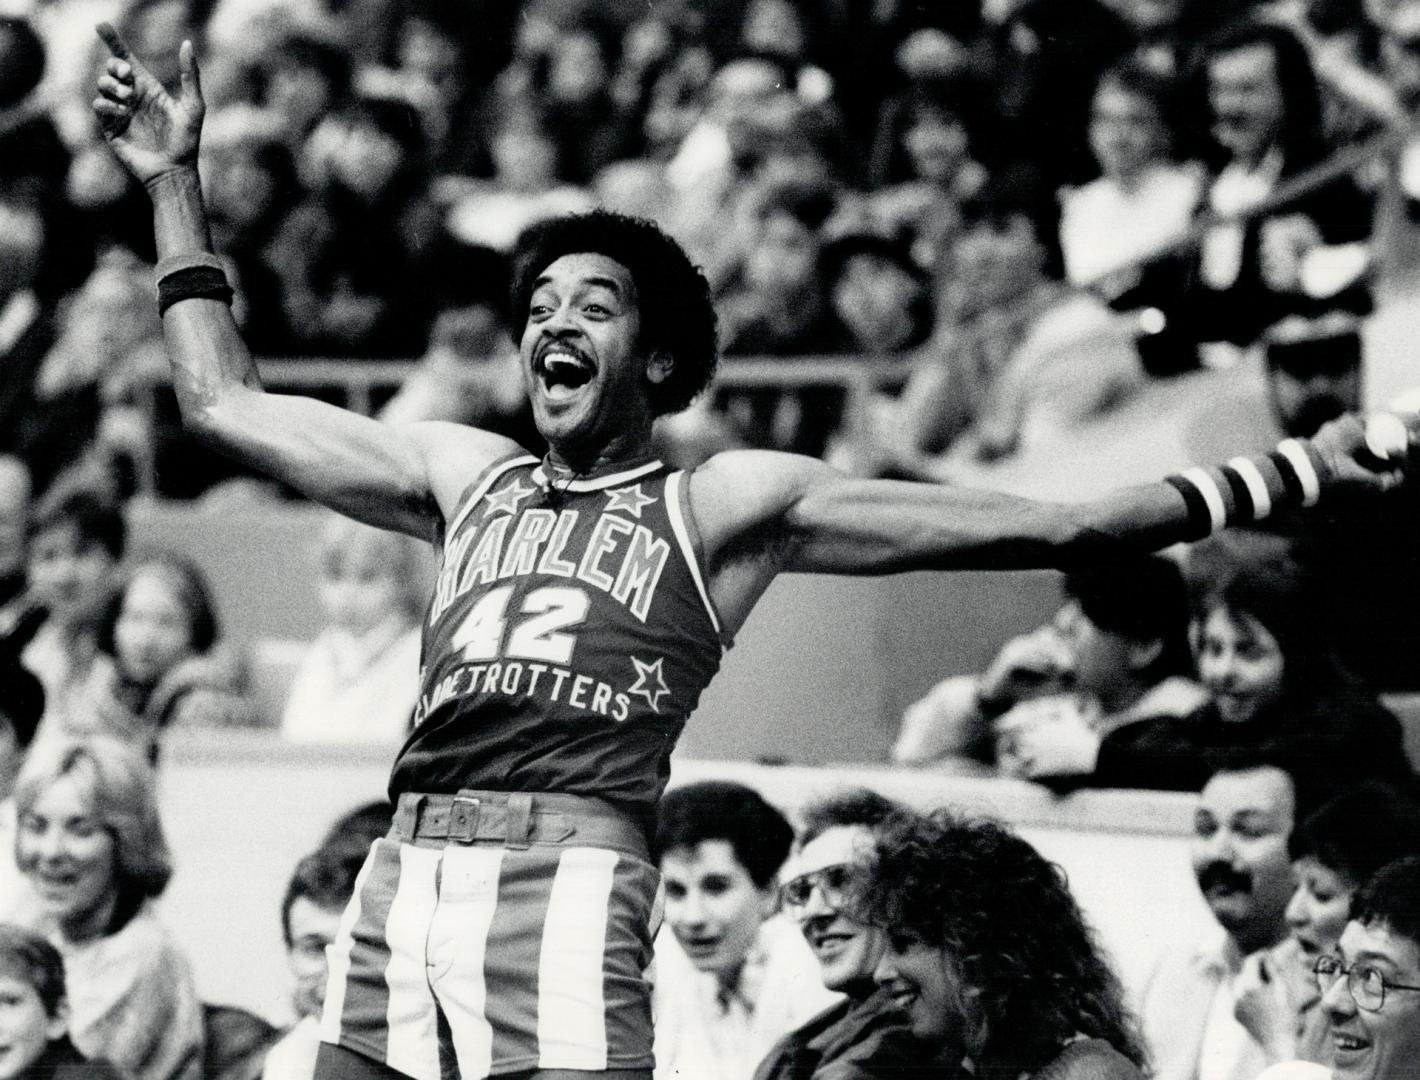 Senior showman on the Harlem Globetrotters is Twiggy Sanders, who showed his style at Maple Leaf Gardens